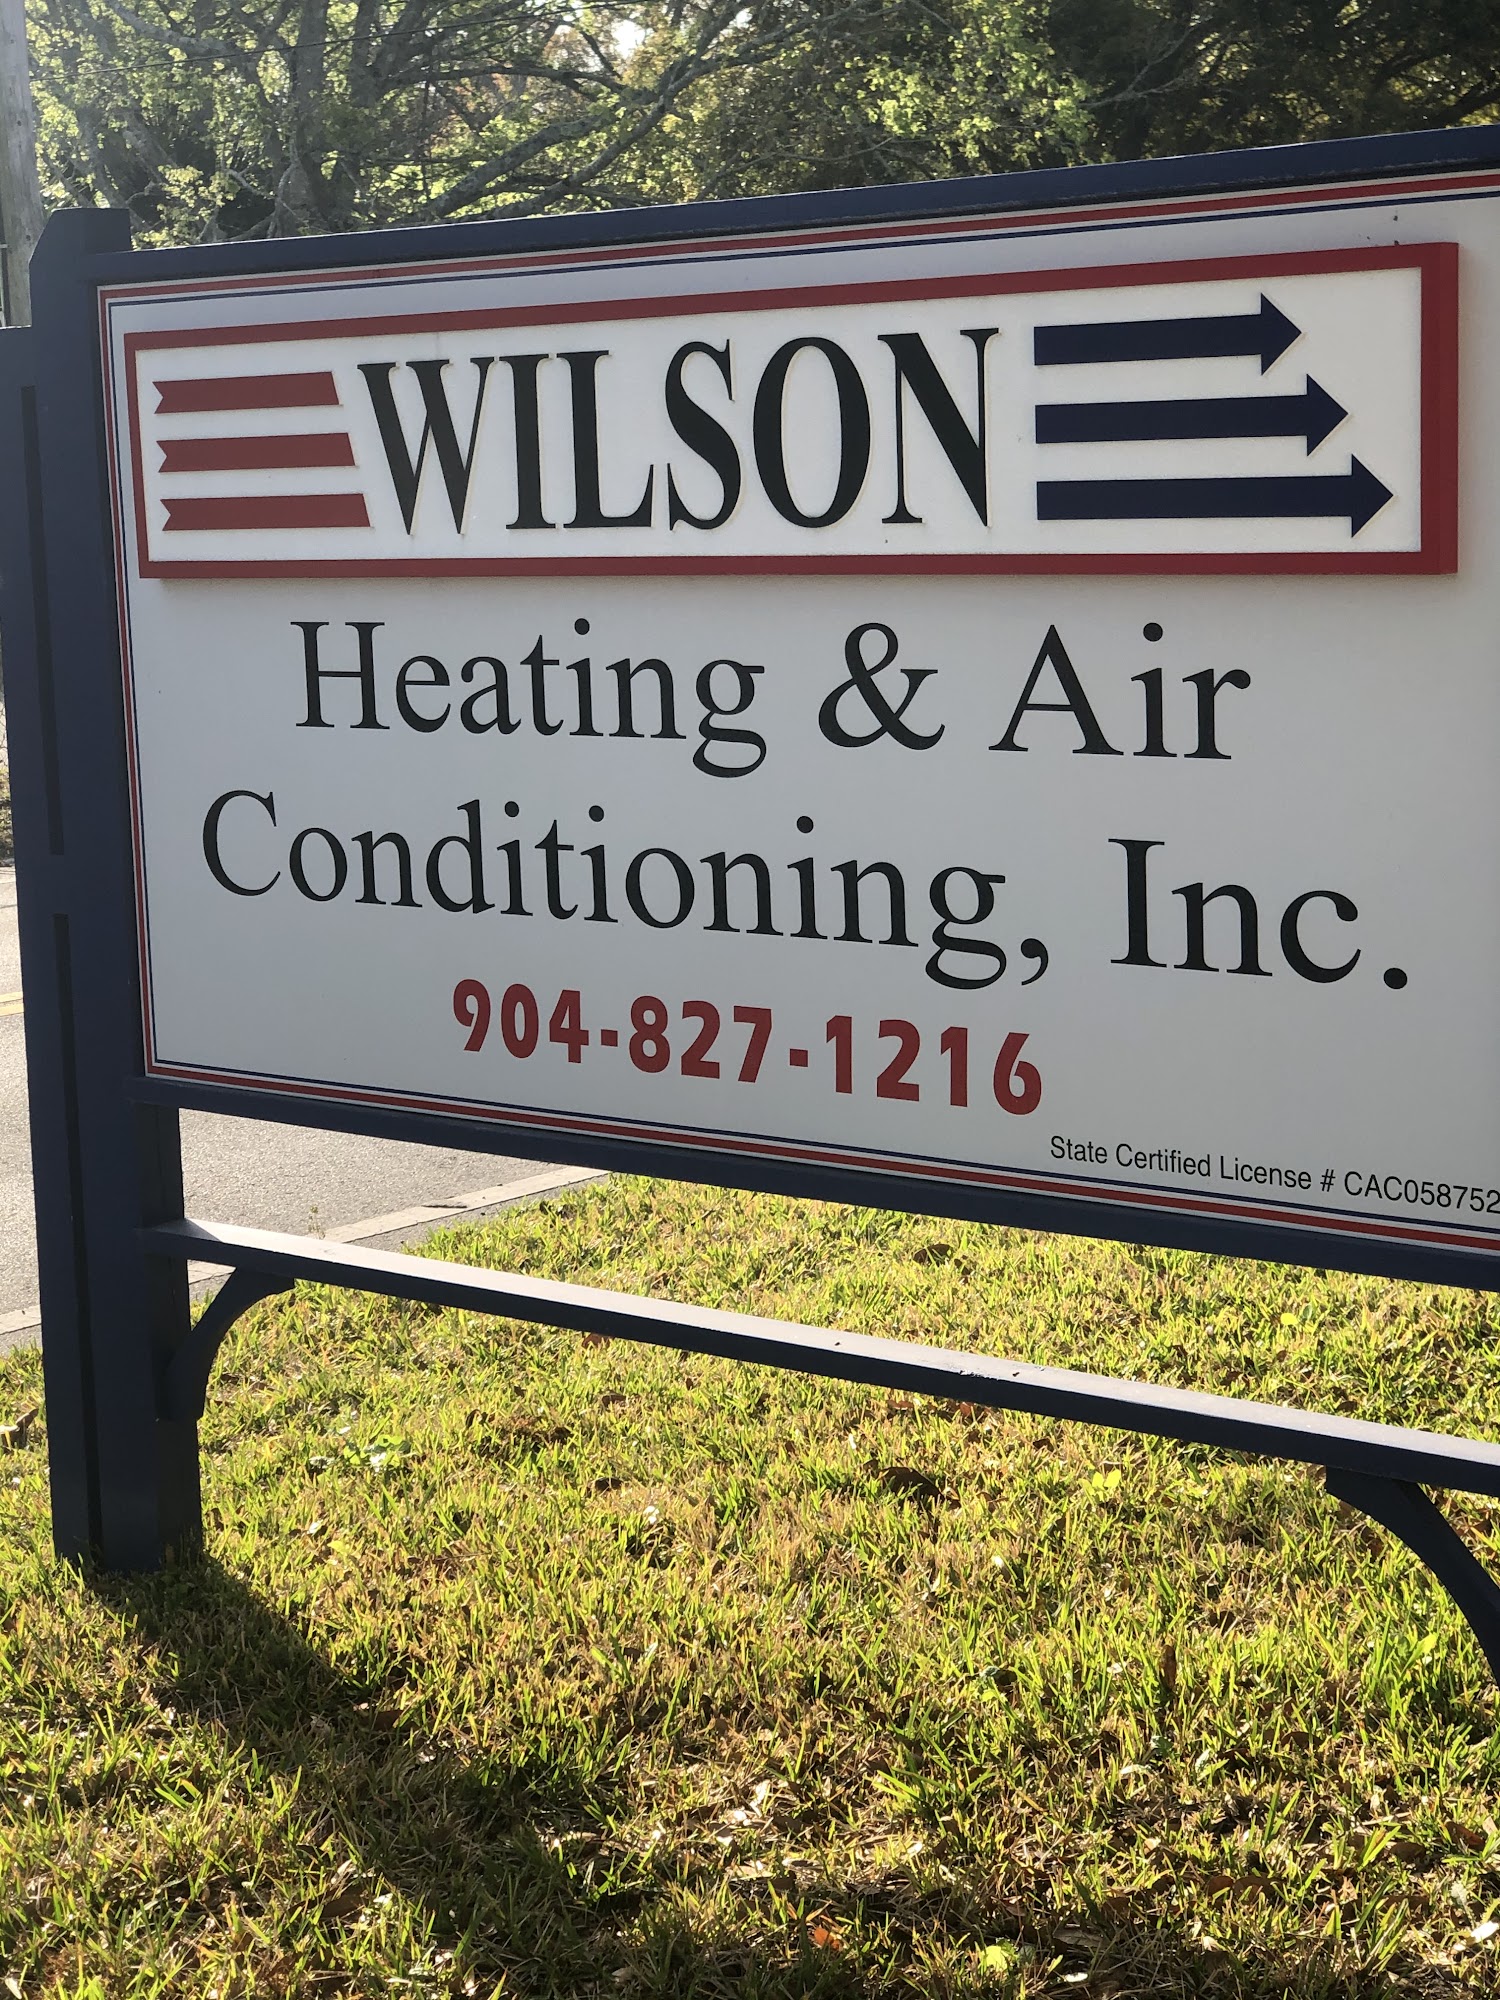 Wilson Heating & Air Conditioning, Inc.